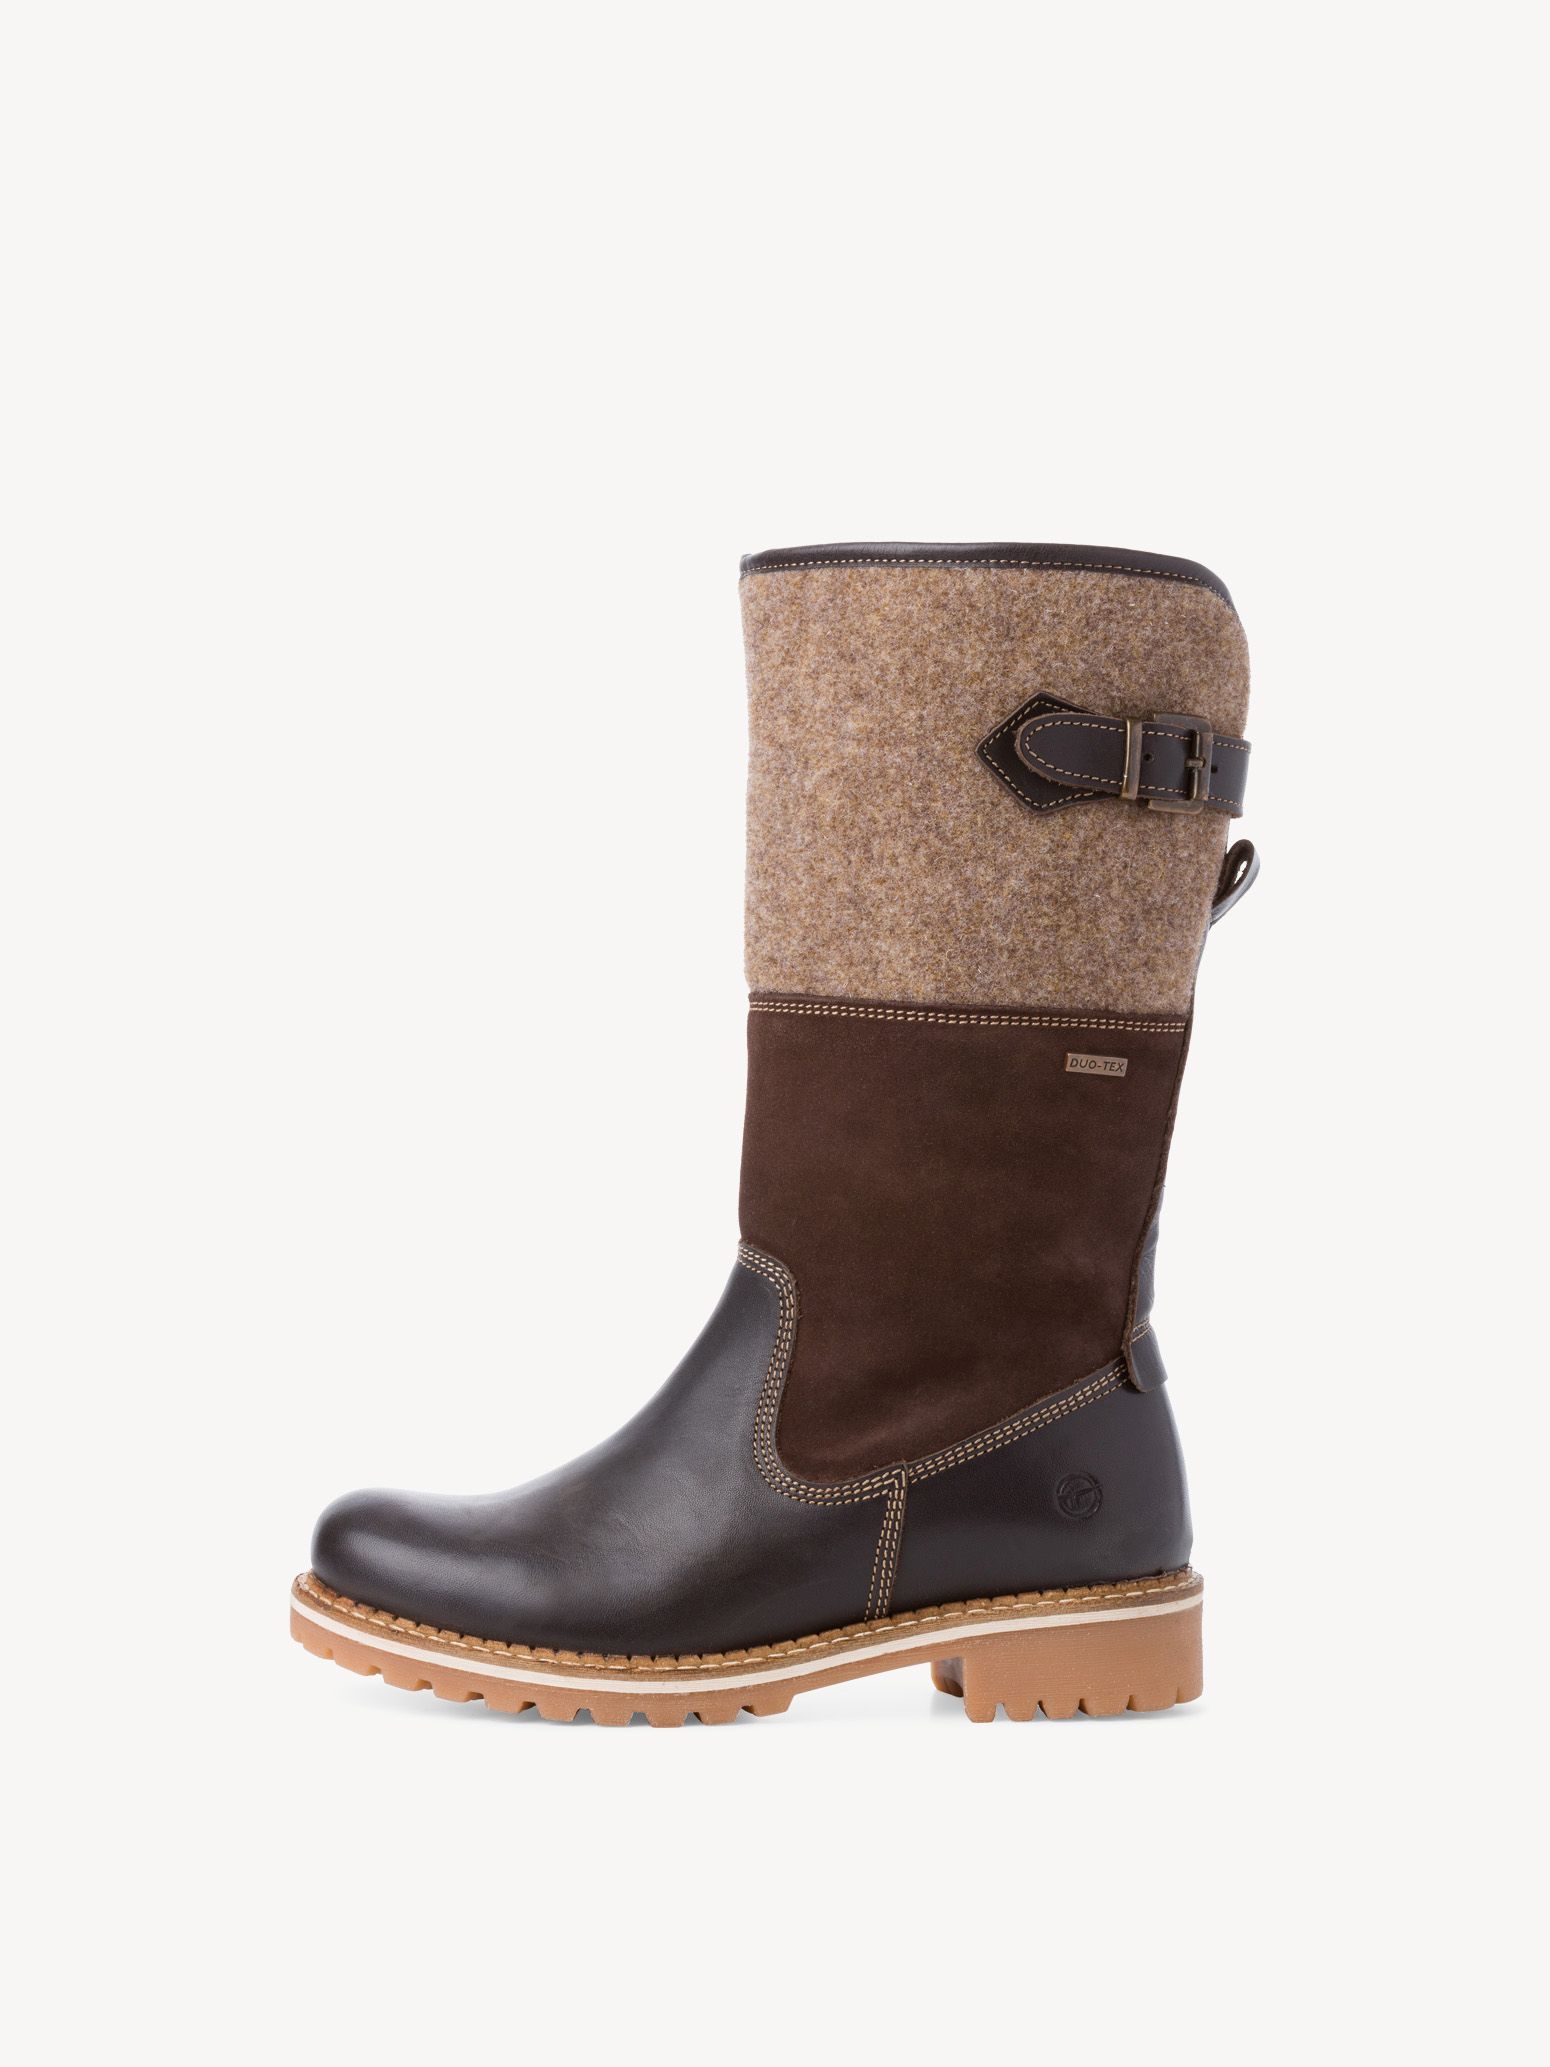 Boots - brown warm lining